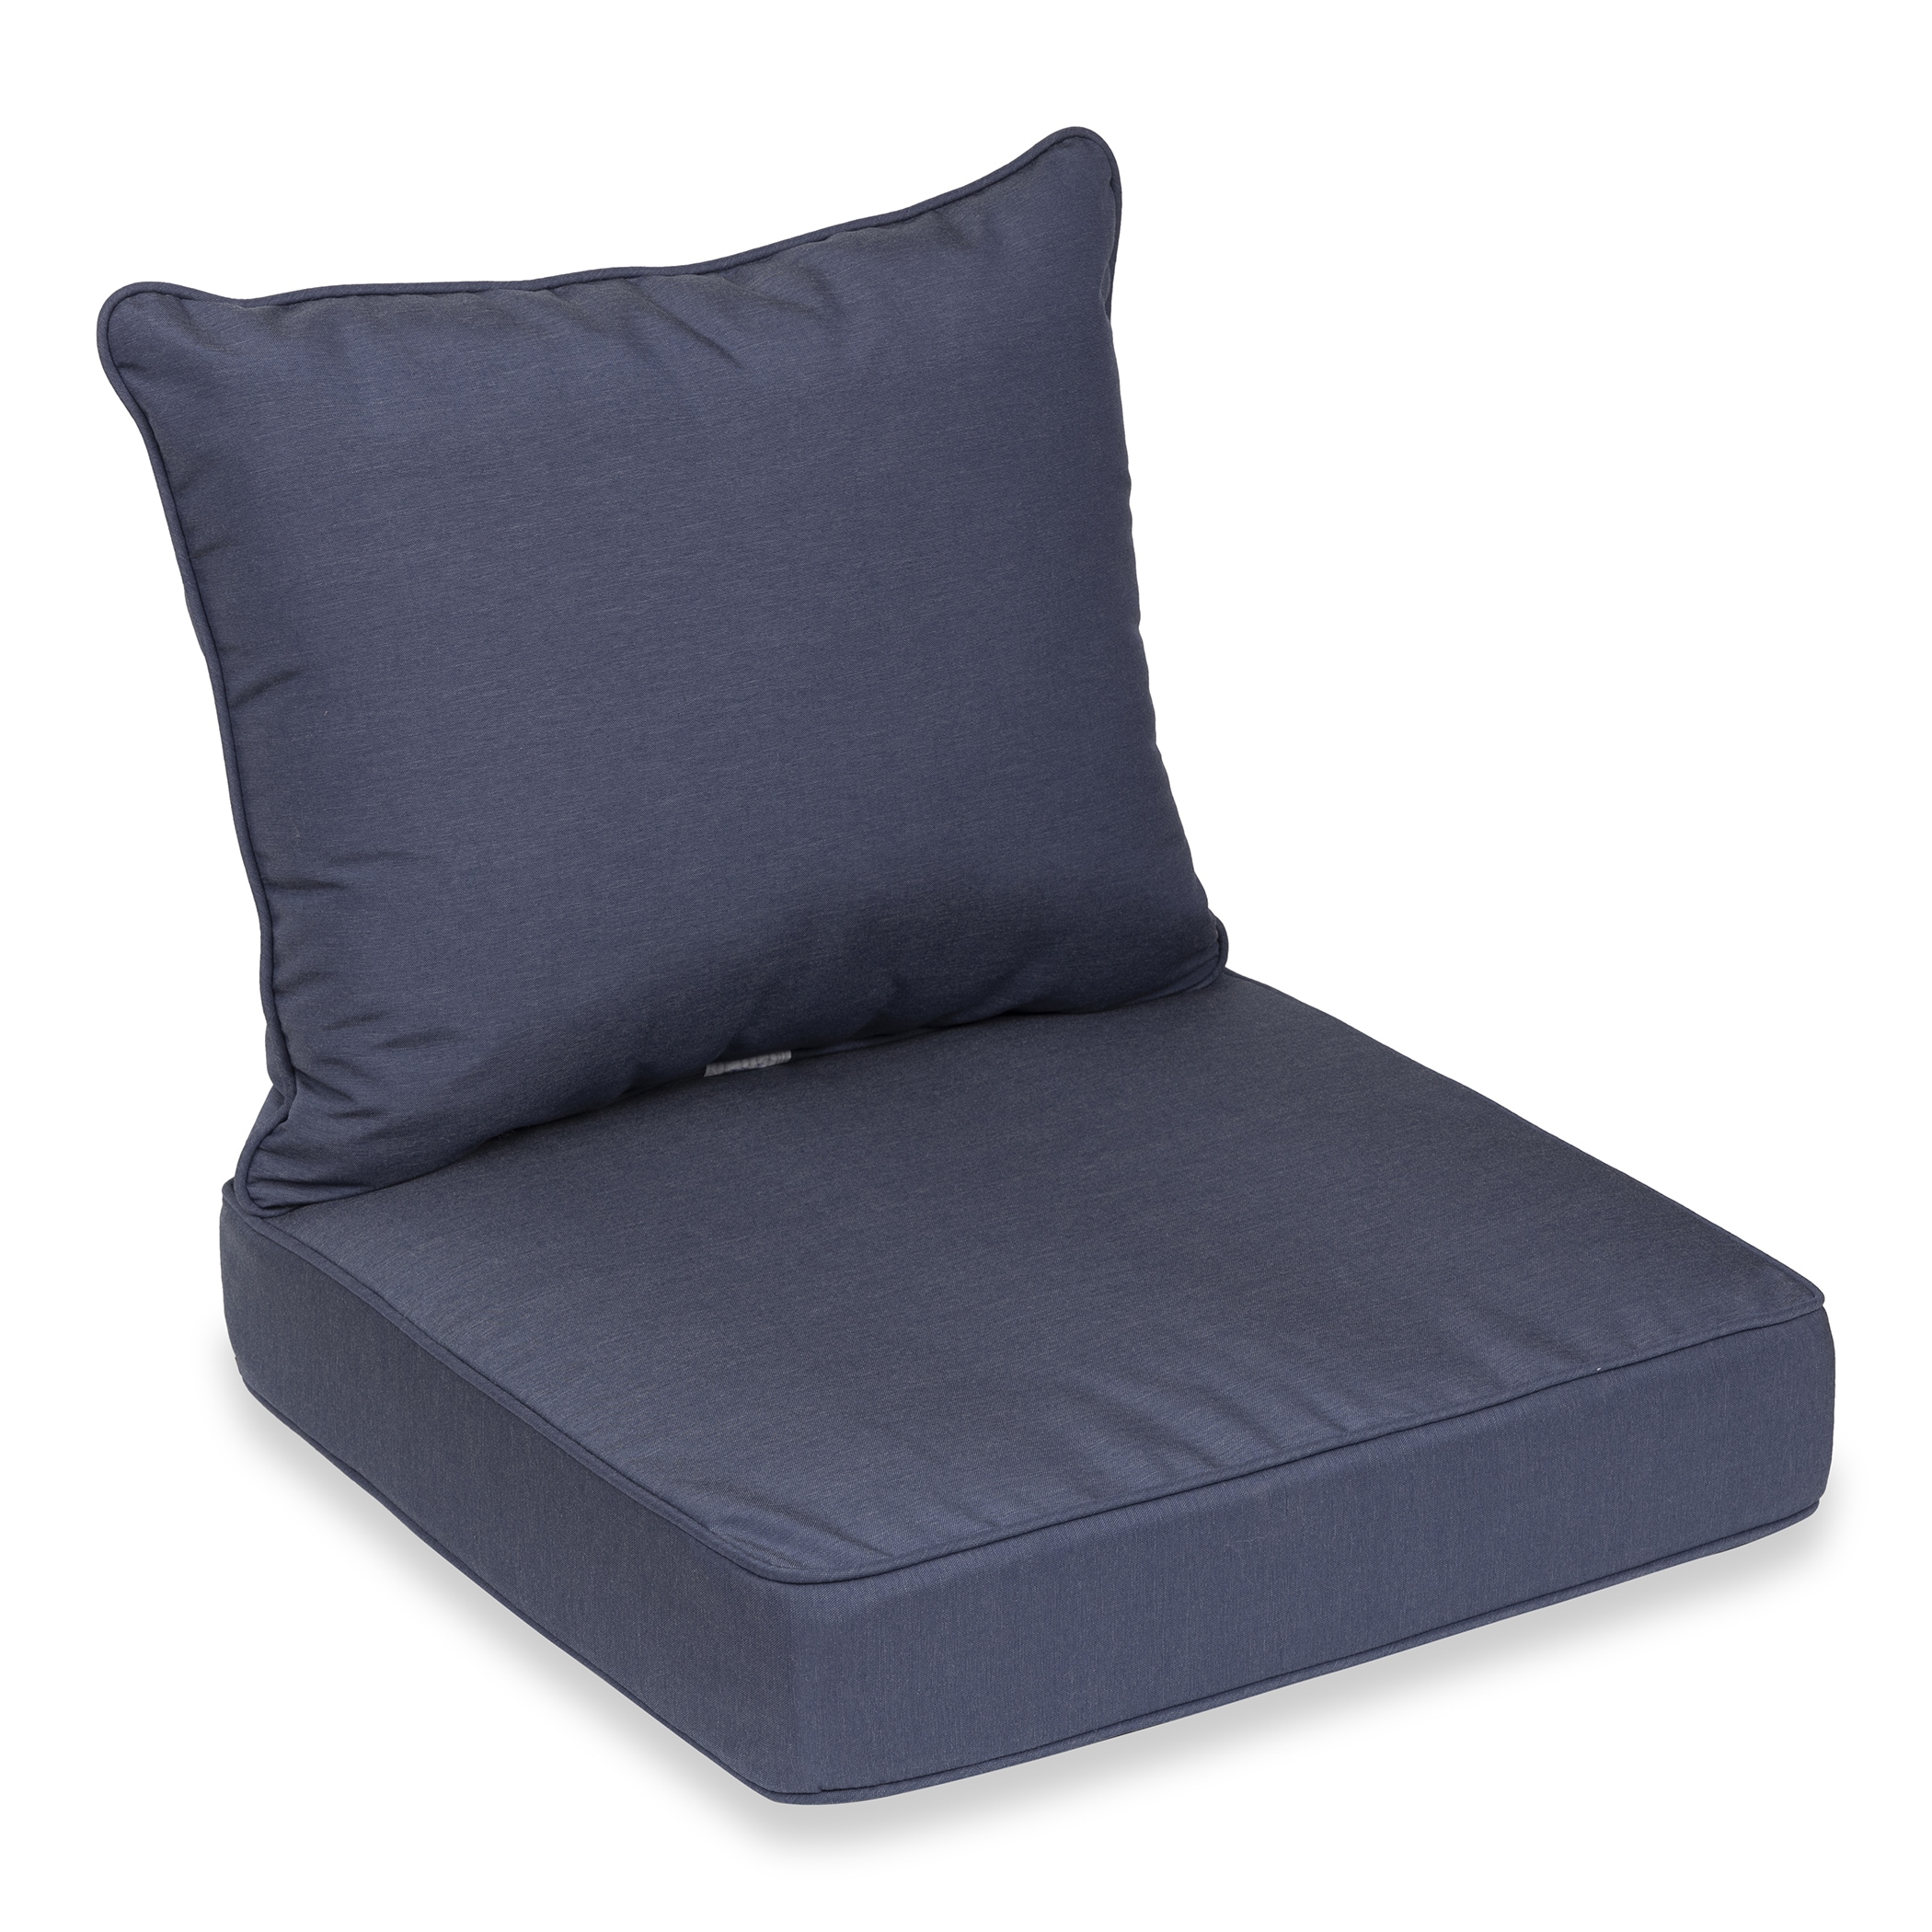 Blazing Needles 60-inch All-Weather Bench Cushion - 60 x 19 - On Sale -  Bed Bath & Beyond - 7654966